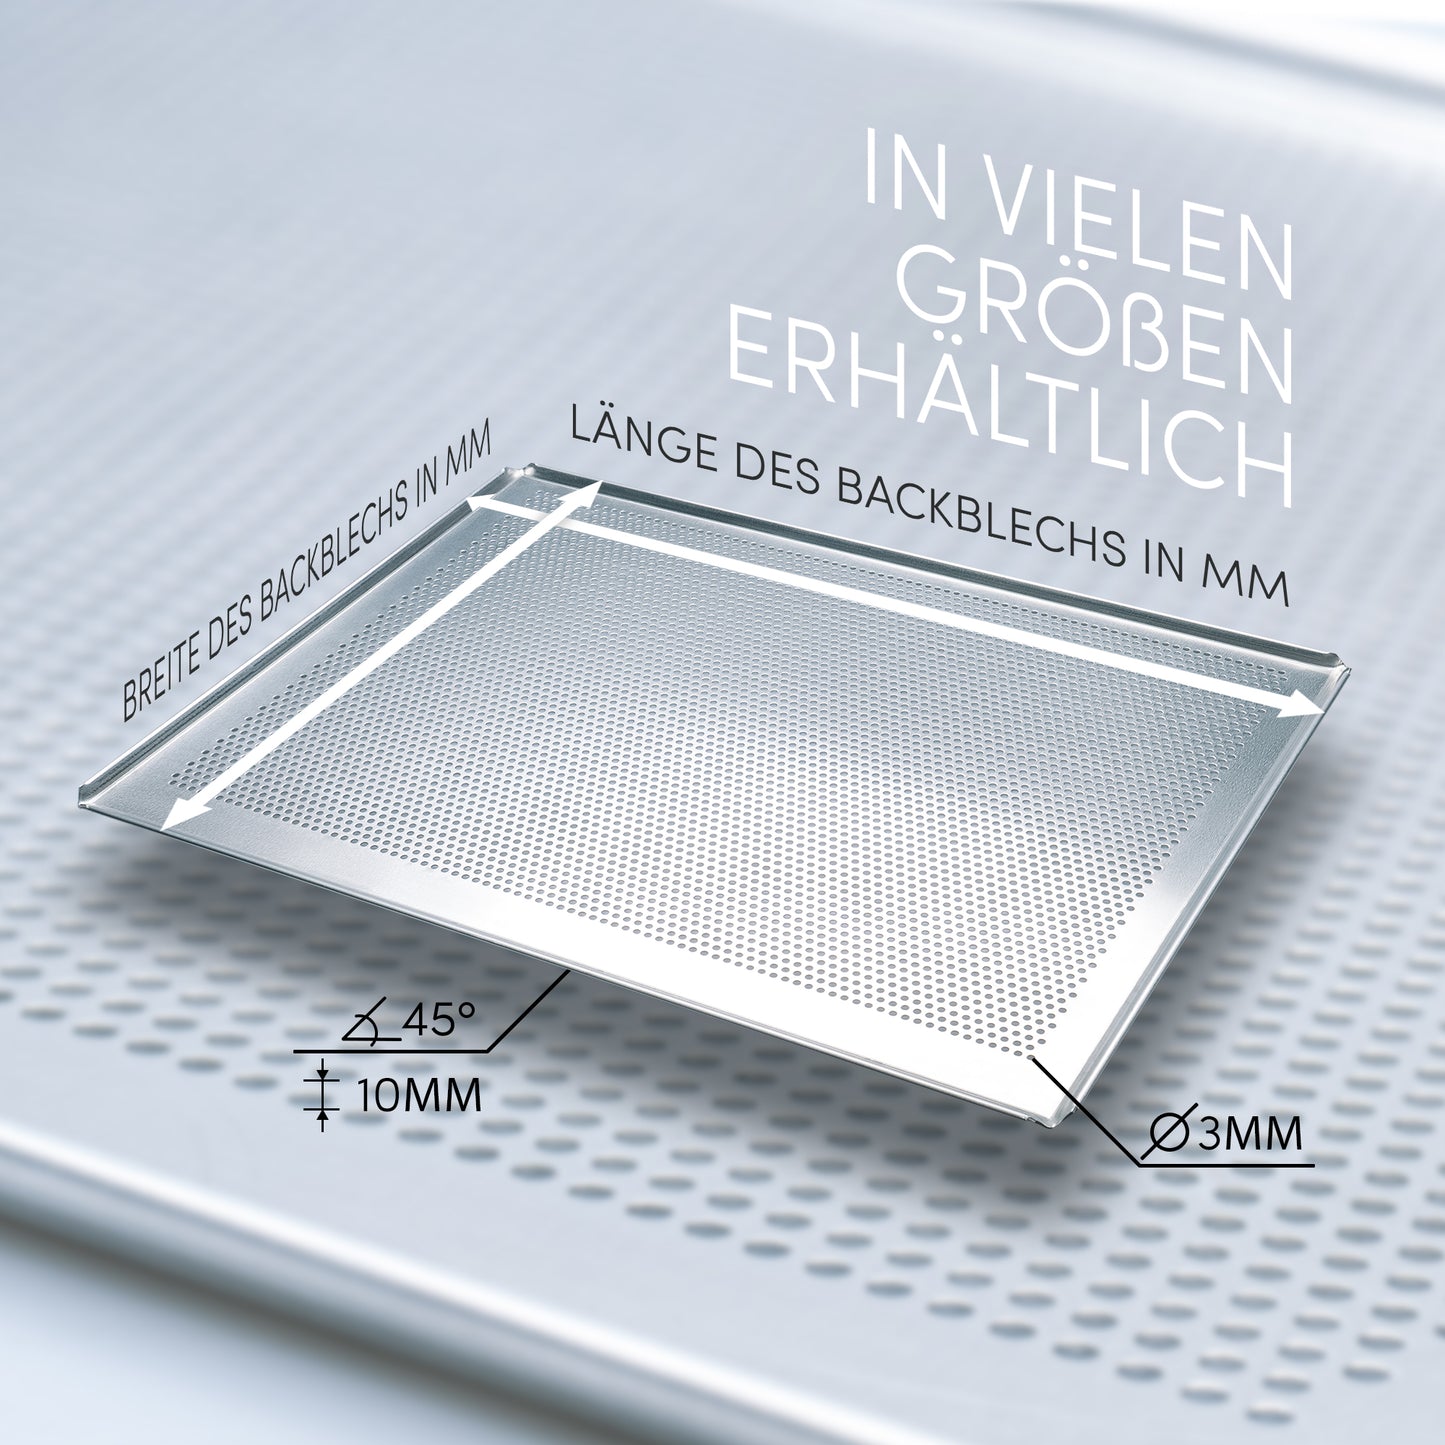 LEHRMANN perforated plate with silicone mat for oven